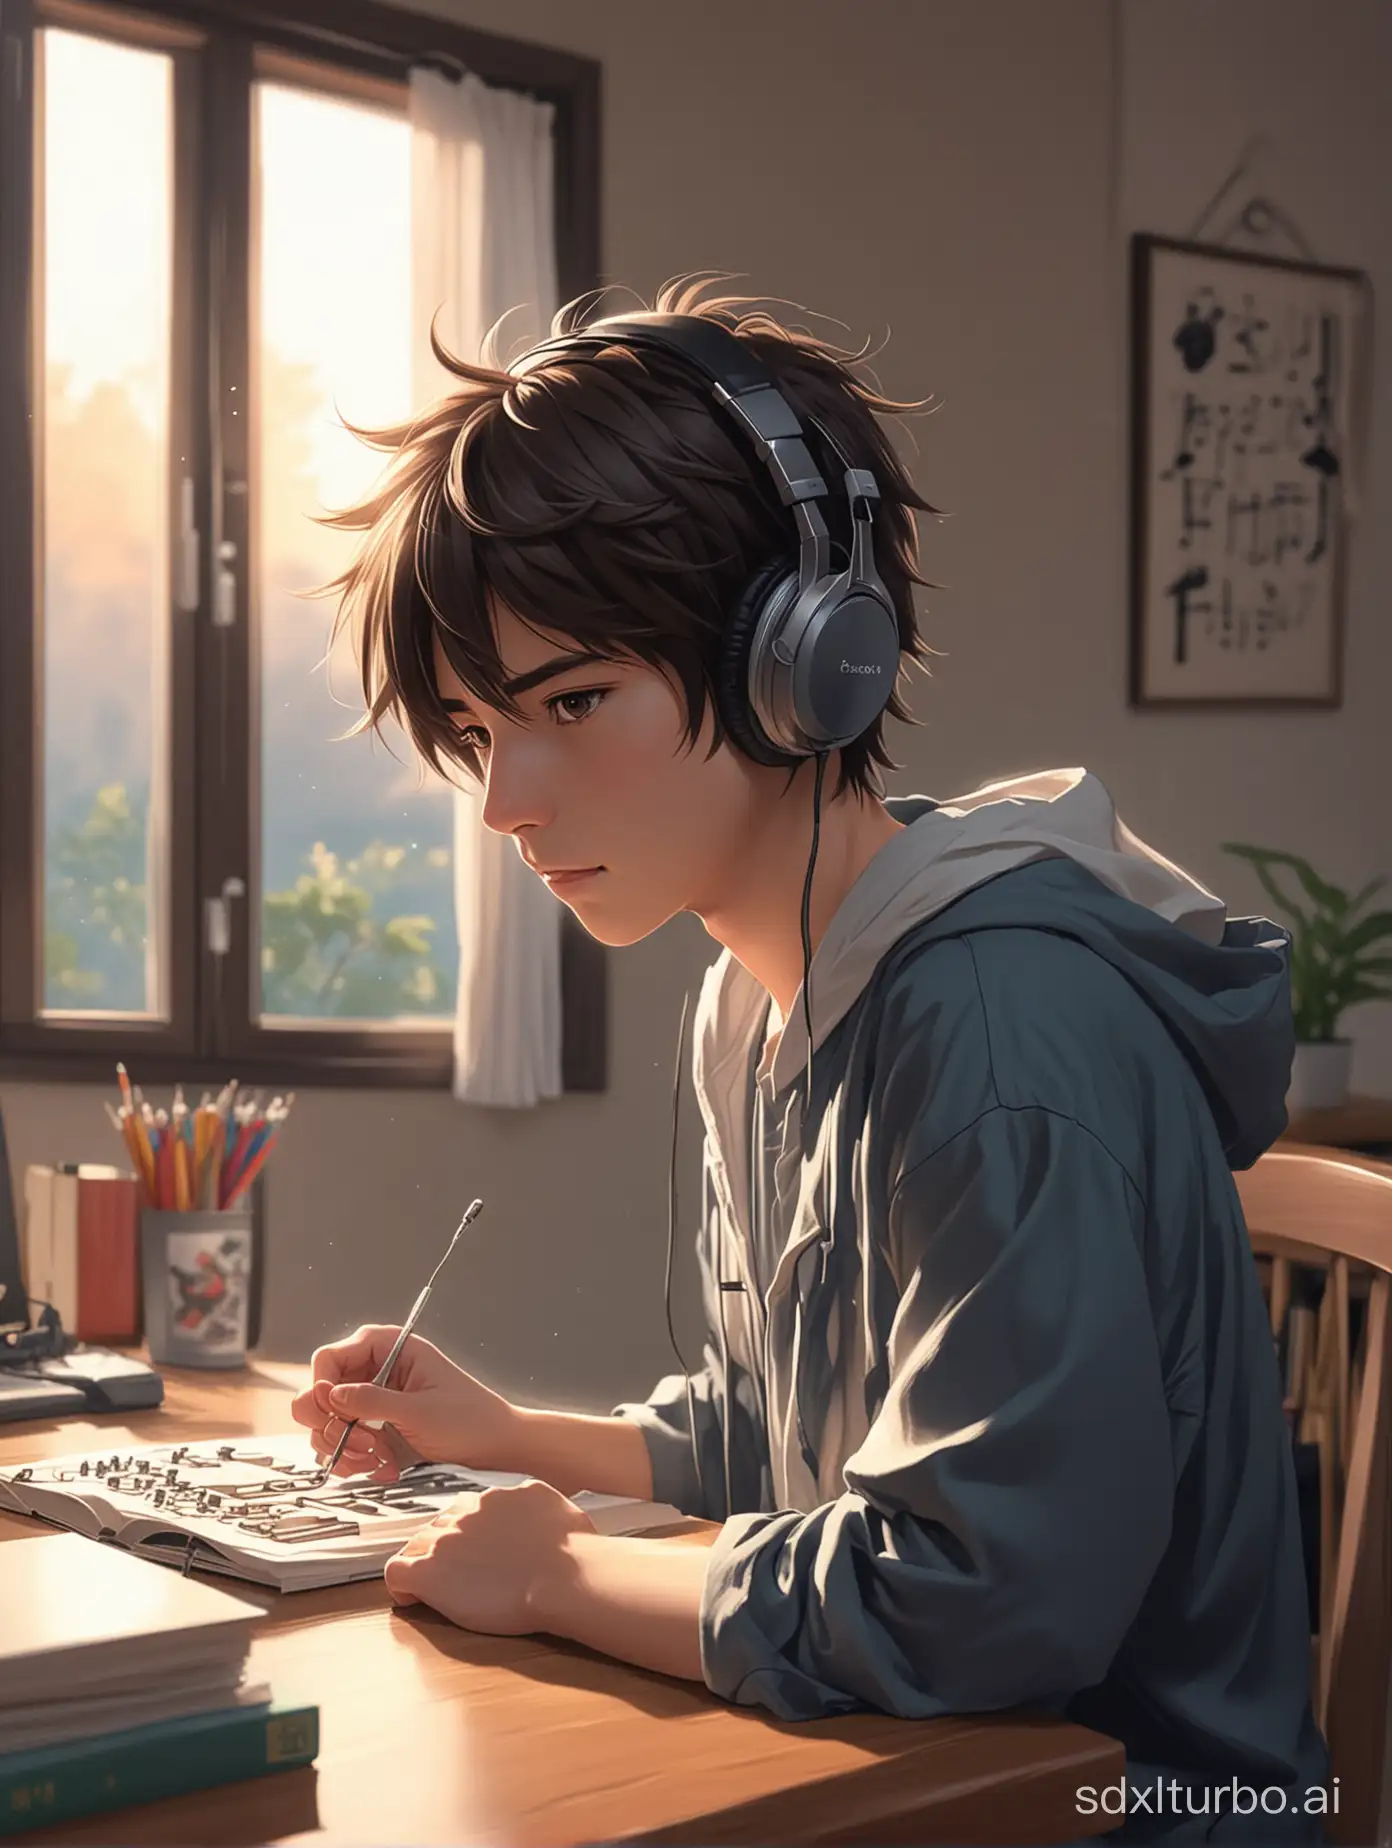 A boy in a Japanese anime style is listening to music with headphones in a quiet study.